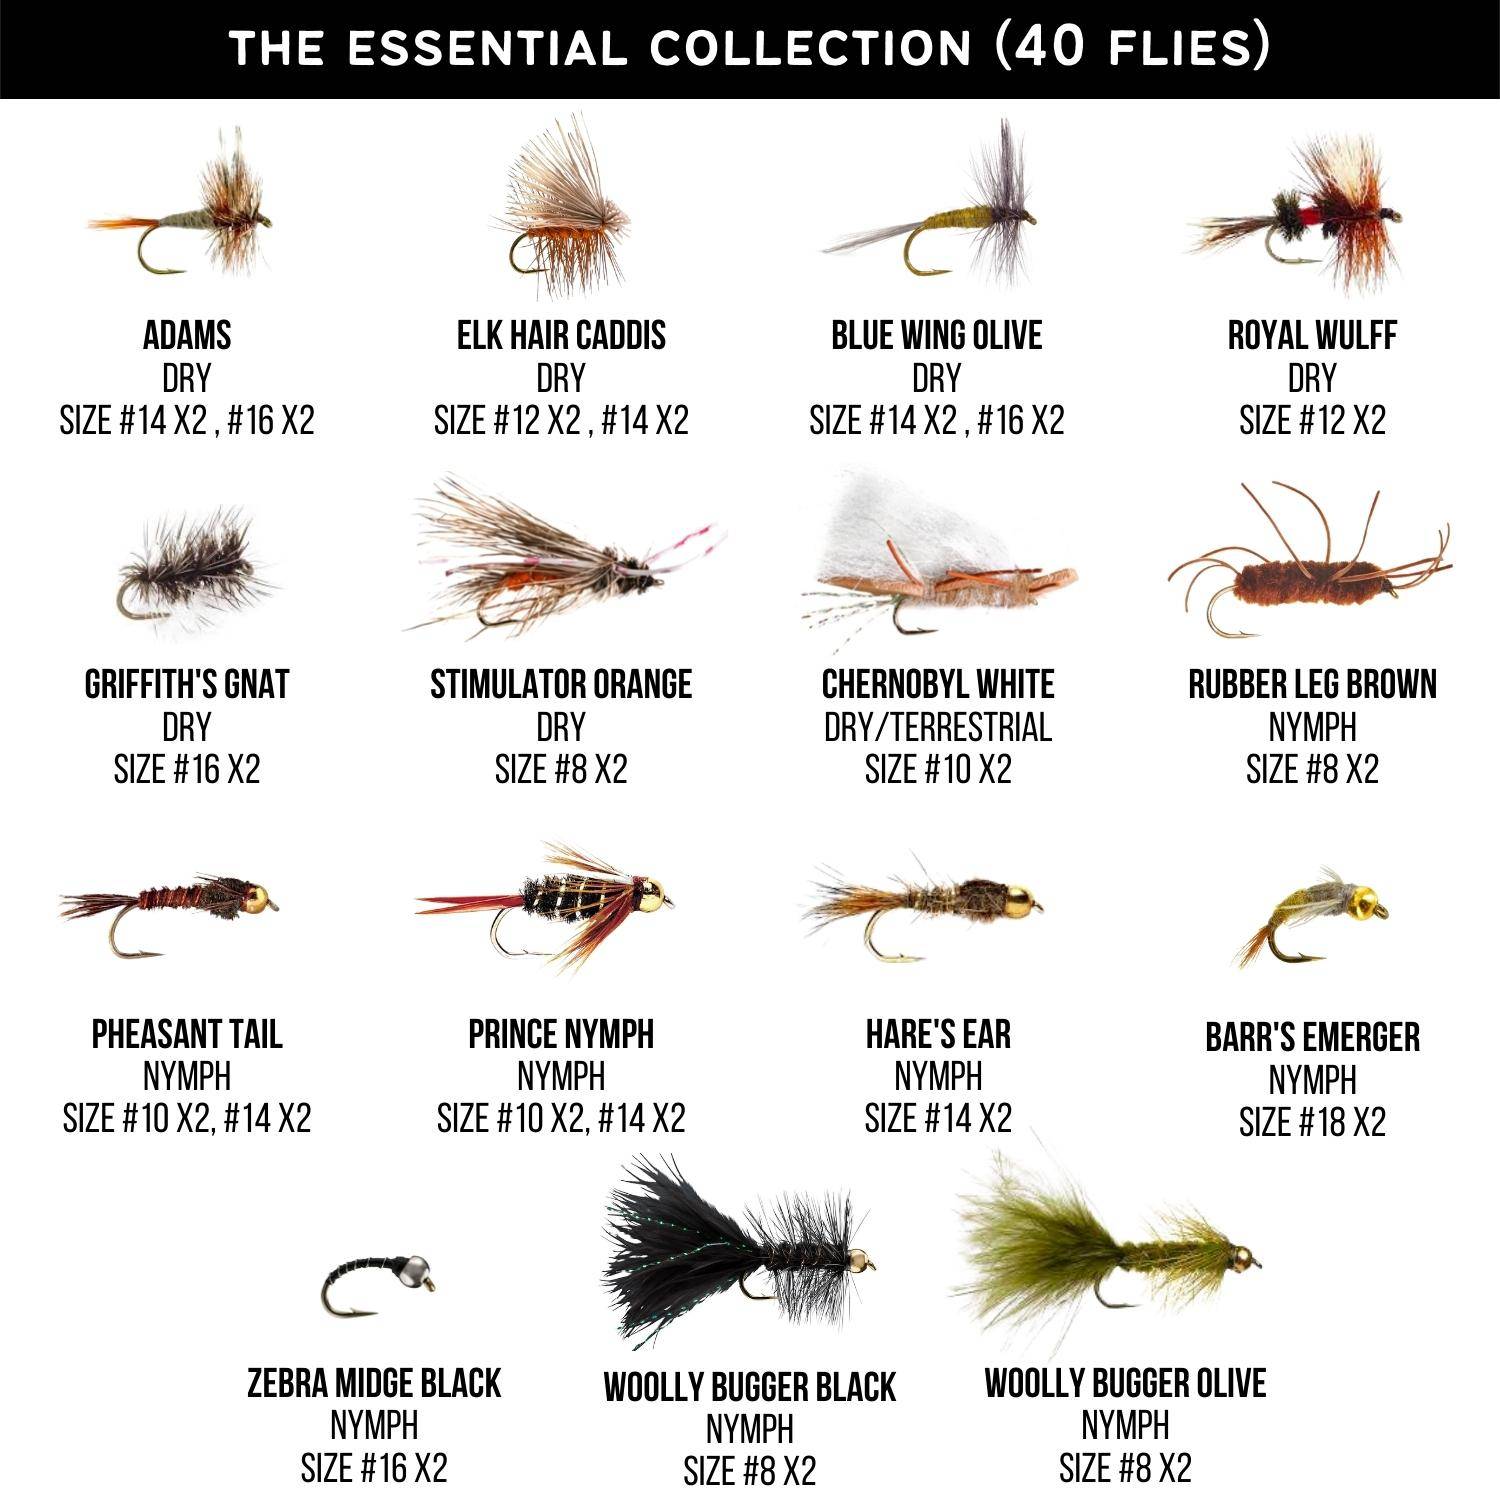 The Essential Dry Fly Collection - 12 Goat Float Flies, 5X Leader